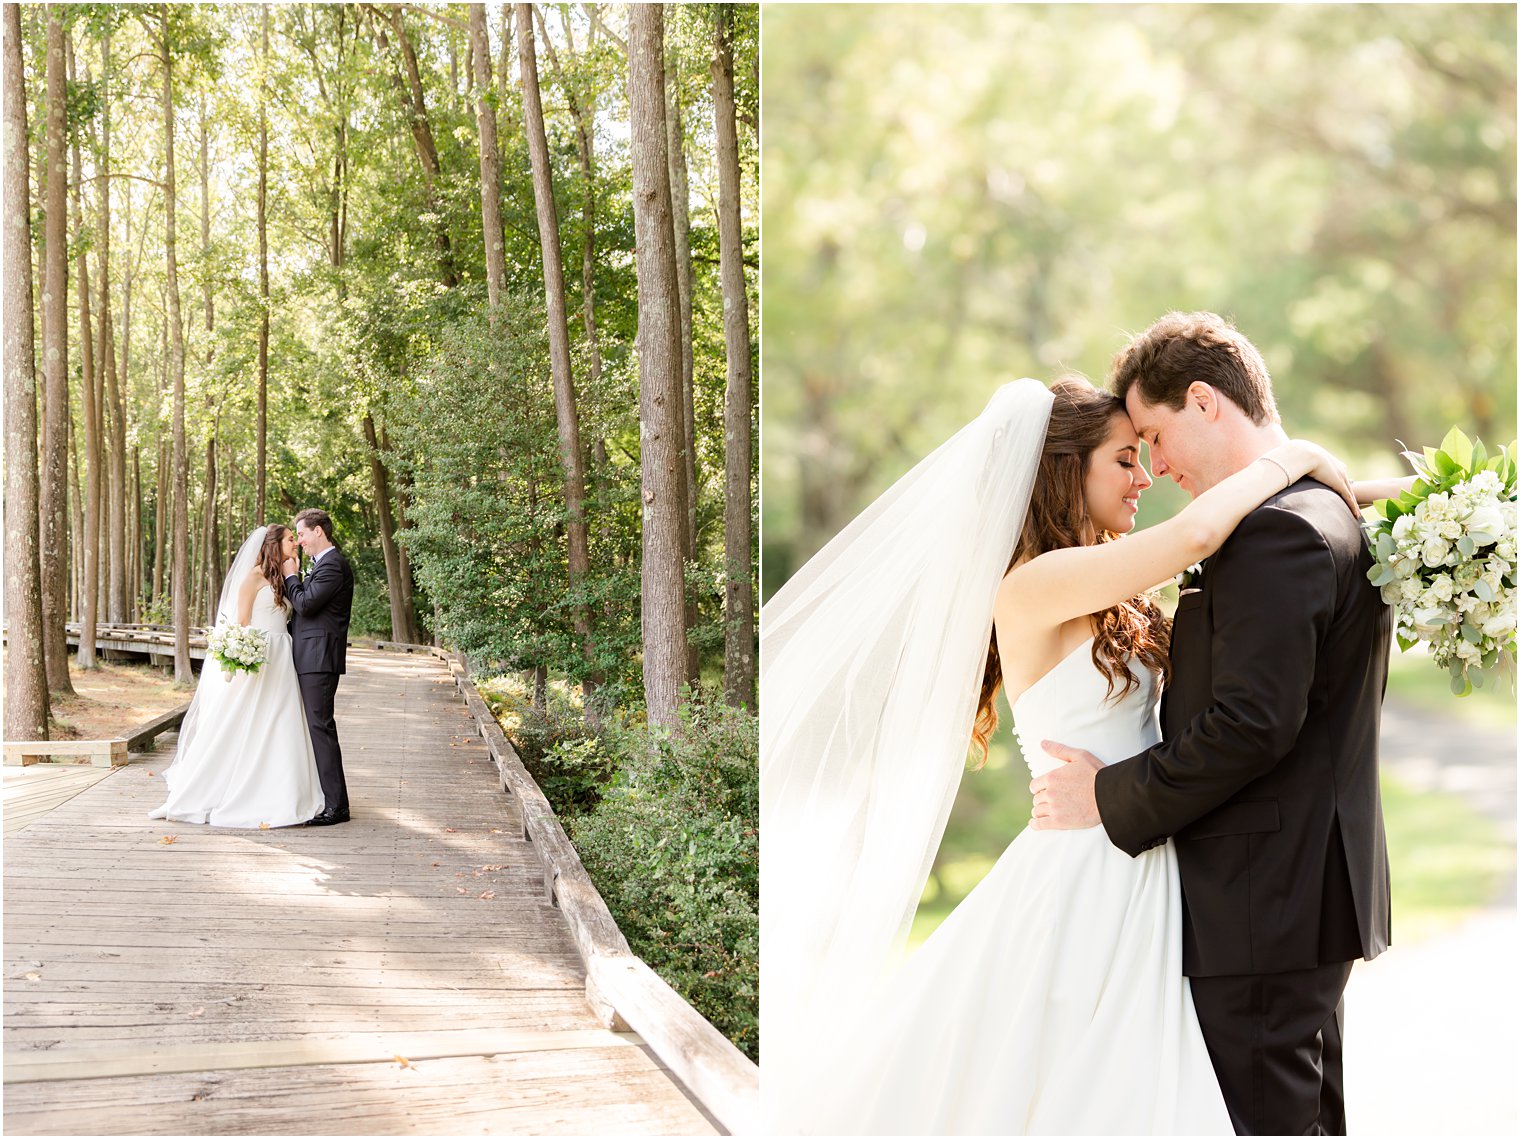 Eagle Oaks Golf and Country Club wedding portraits of bride and groom on wooden pathway